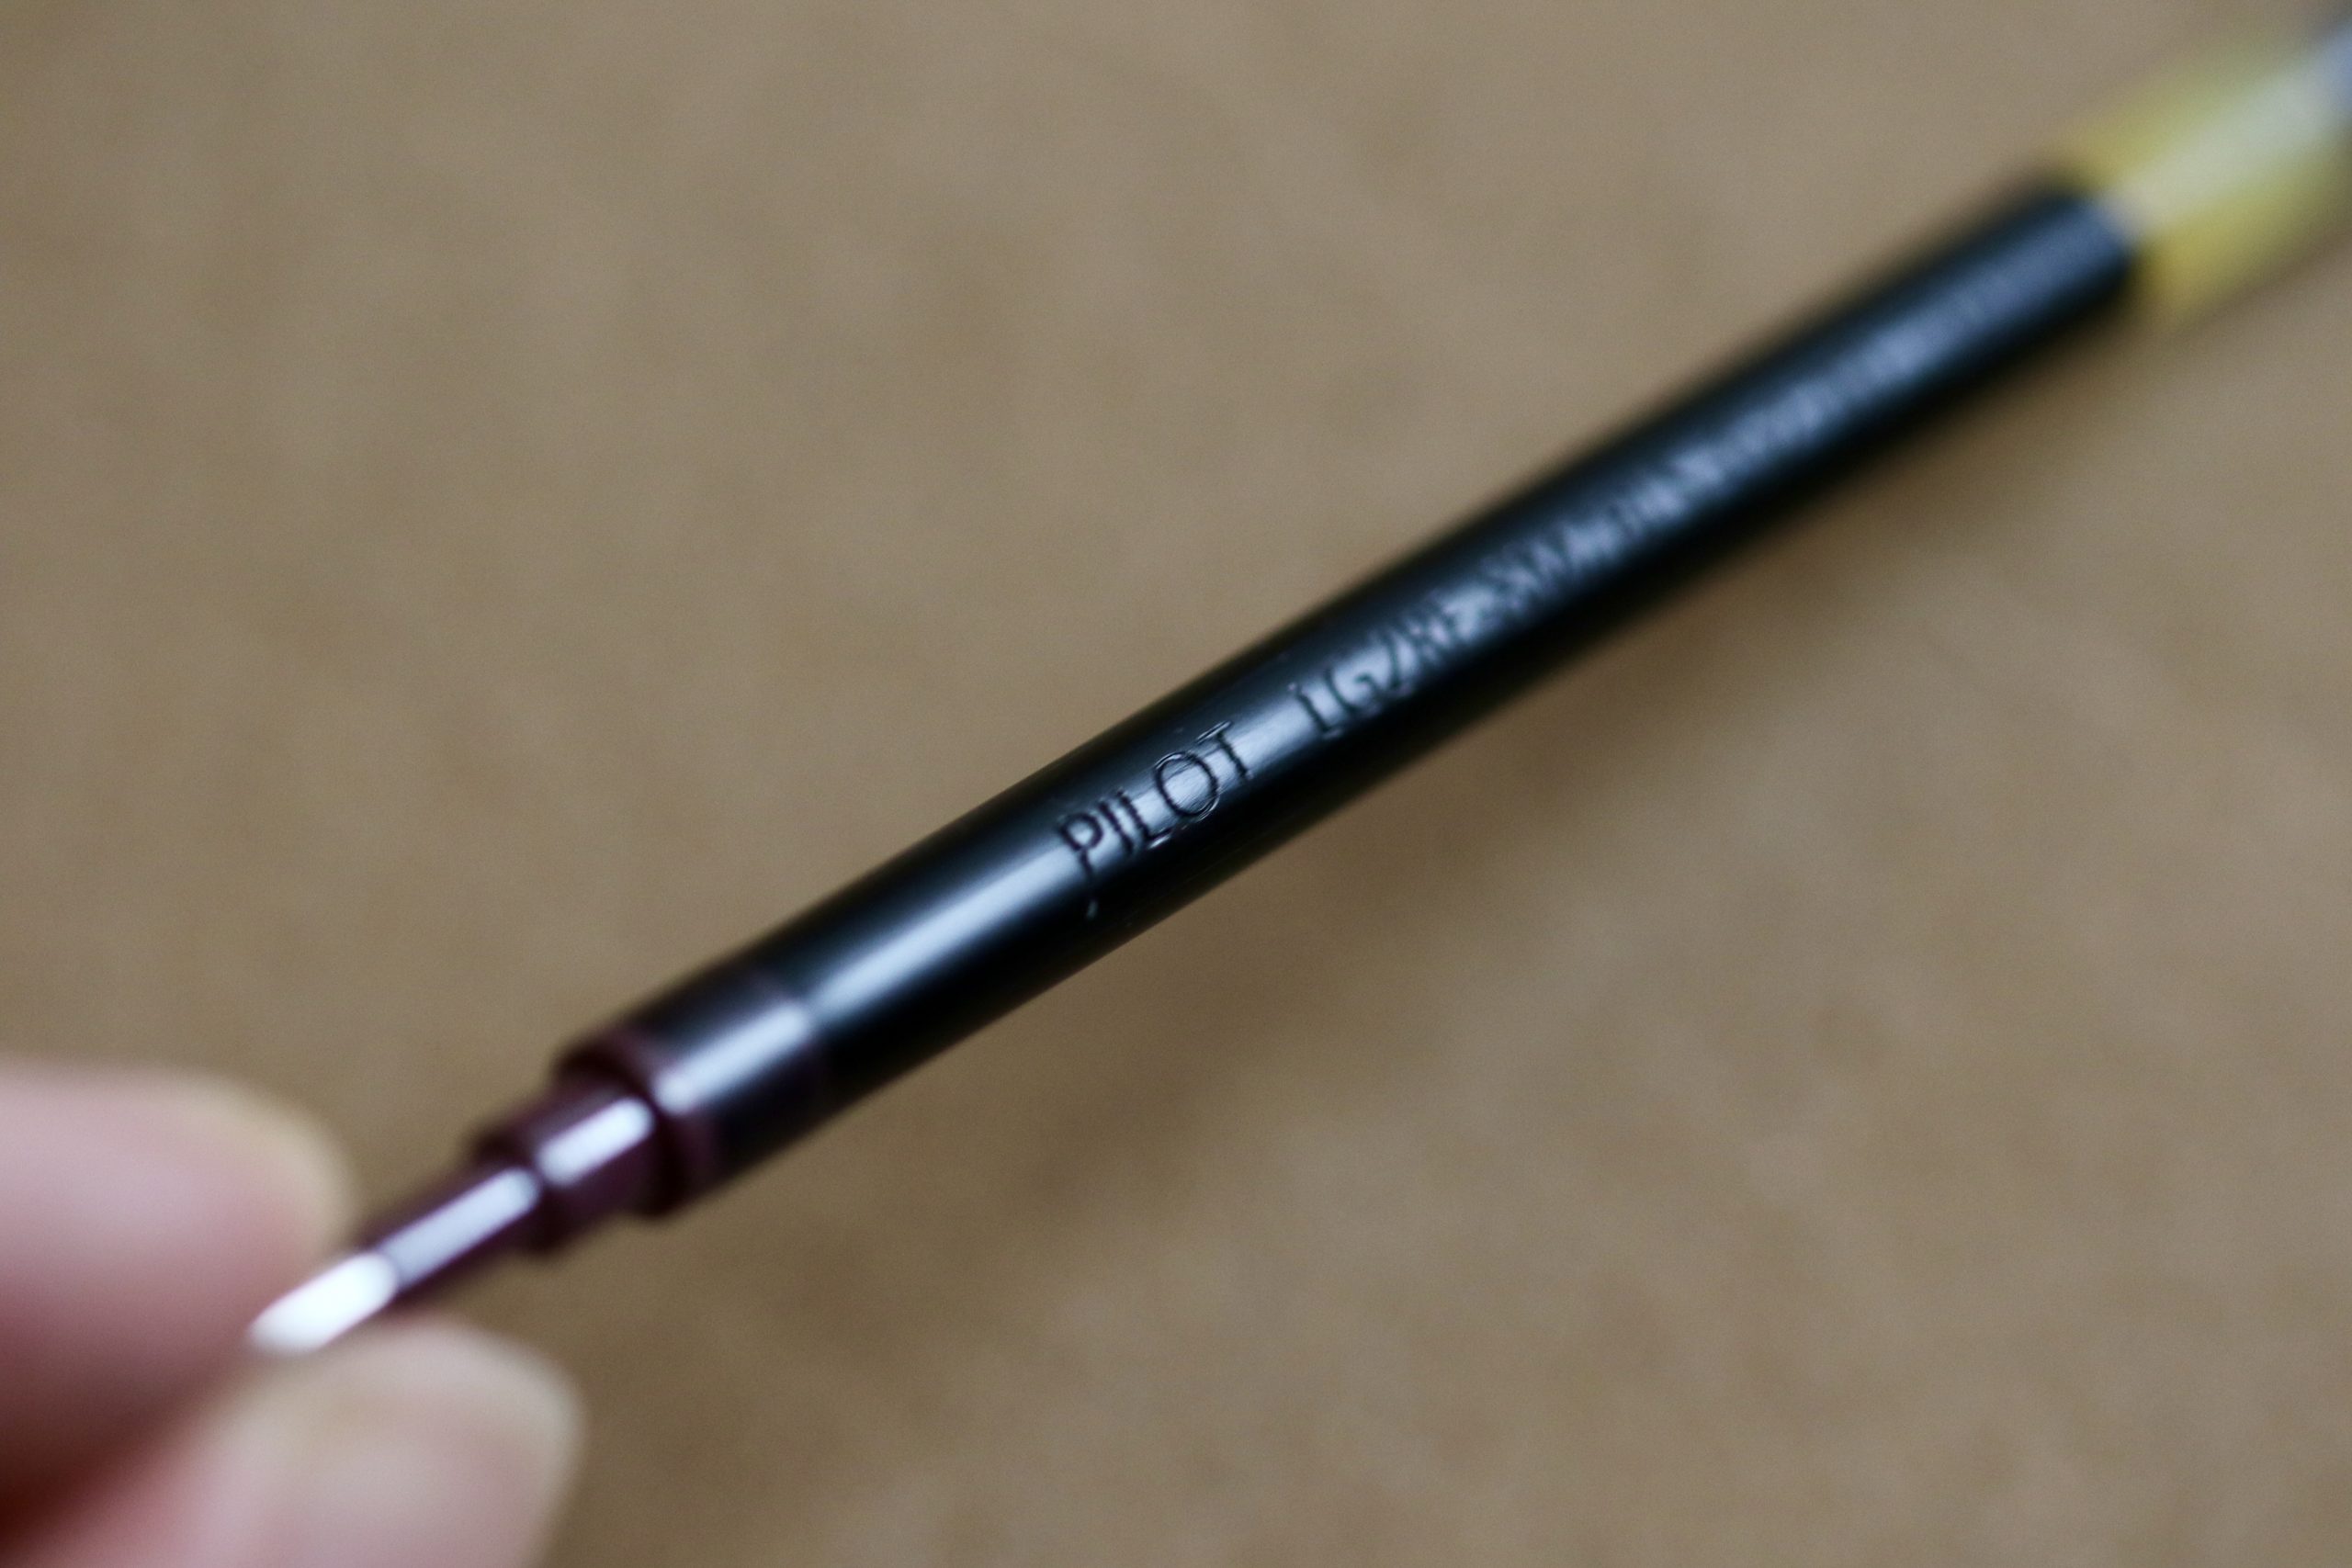 The Pilot G2 bolt action pen refill. These are easy to find and come in a rainbow of colors.